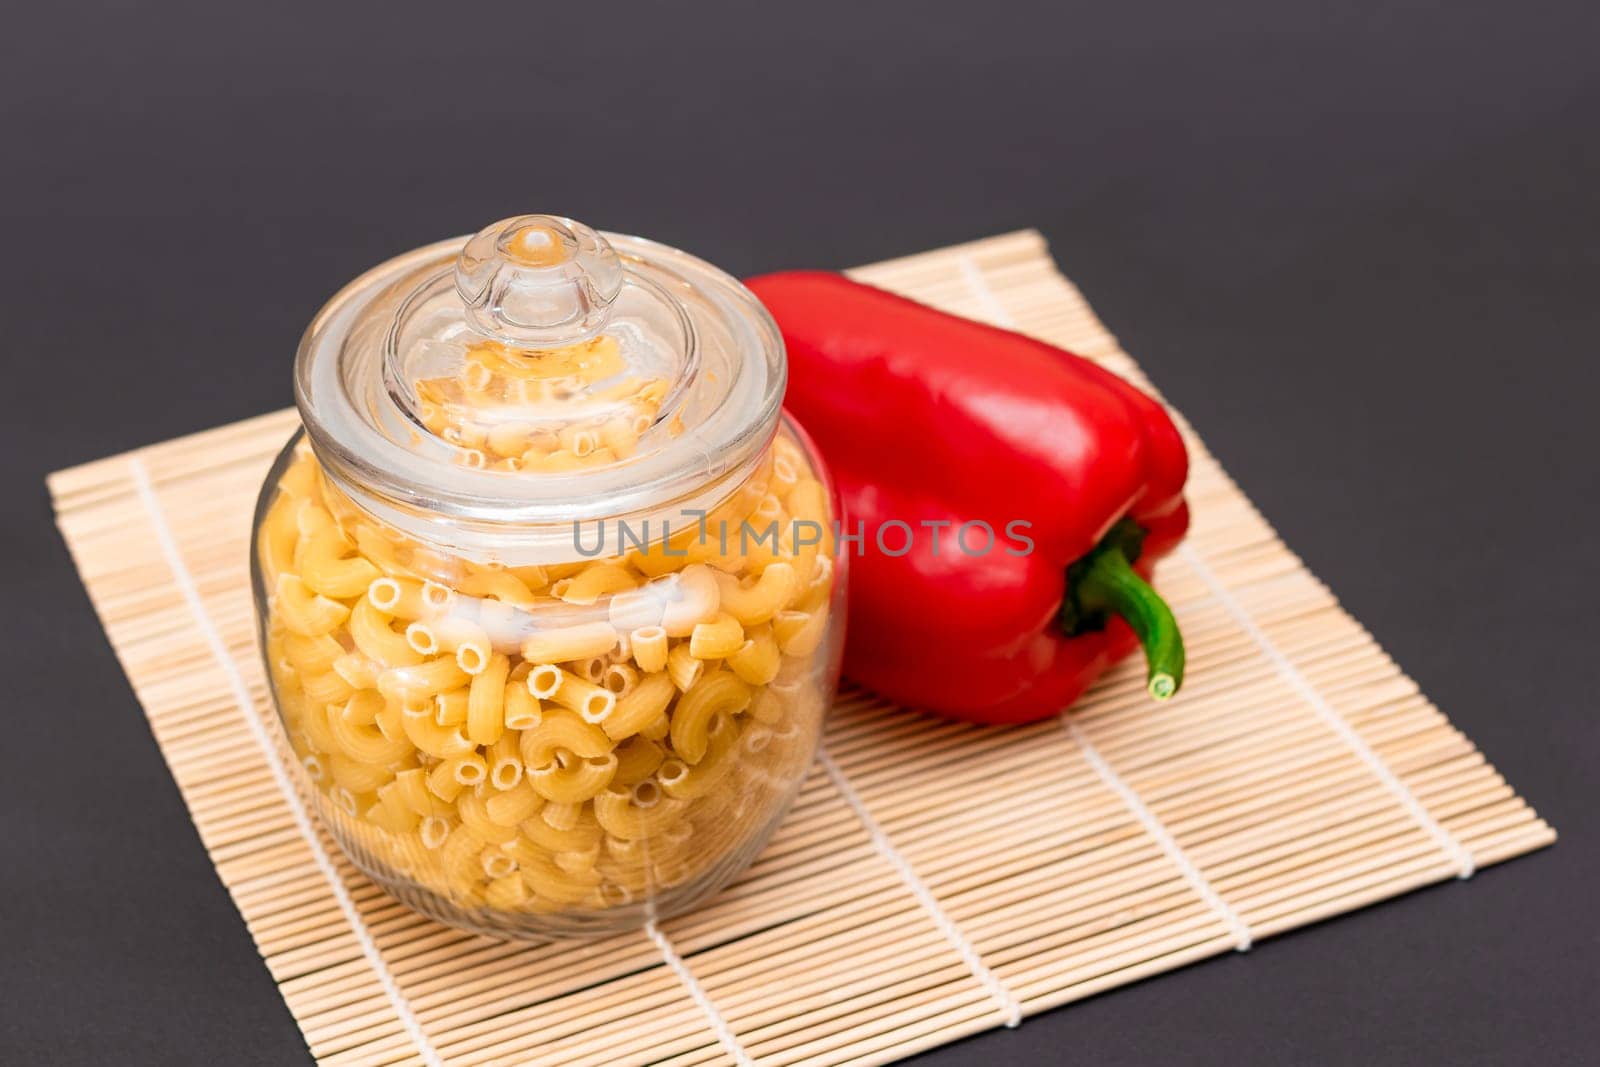 Uncooked Chifferi Rigati Pasta in Glass Jar with Red Bell Pepper on Bamboo Mat on Black Background. Fat and Unhealthy Food. Scattered Classic Dry Macaroni. Italian Culture and Cuisine. Raw Pasta